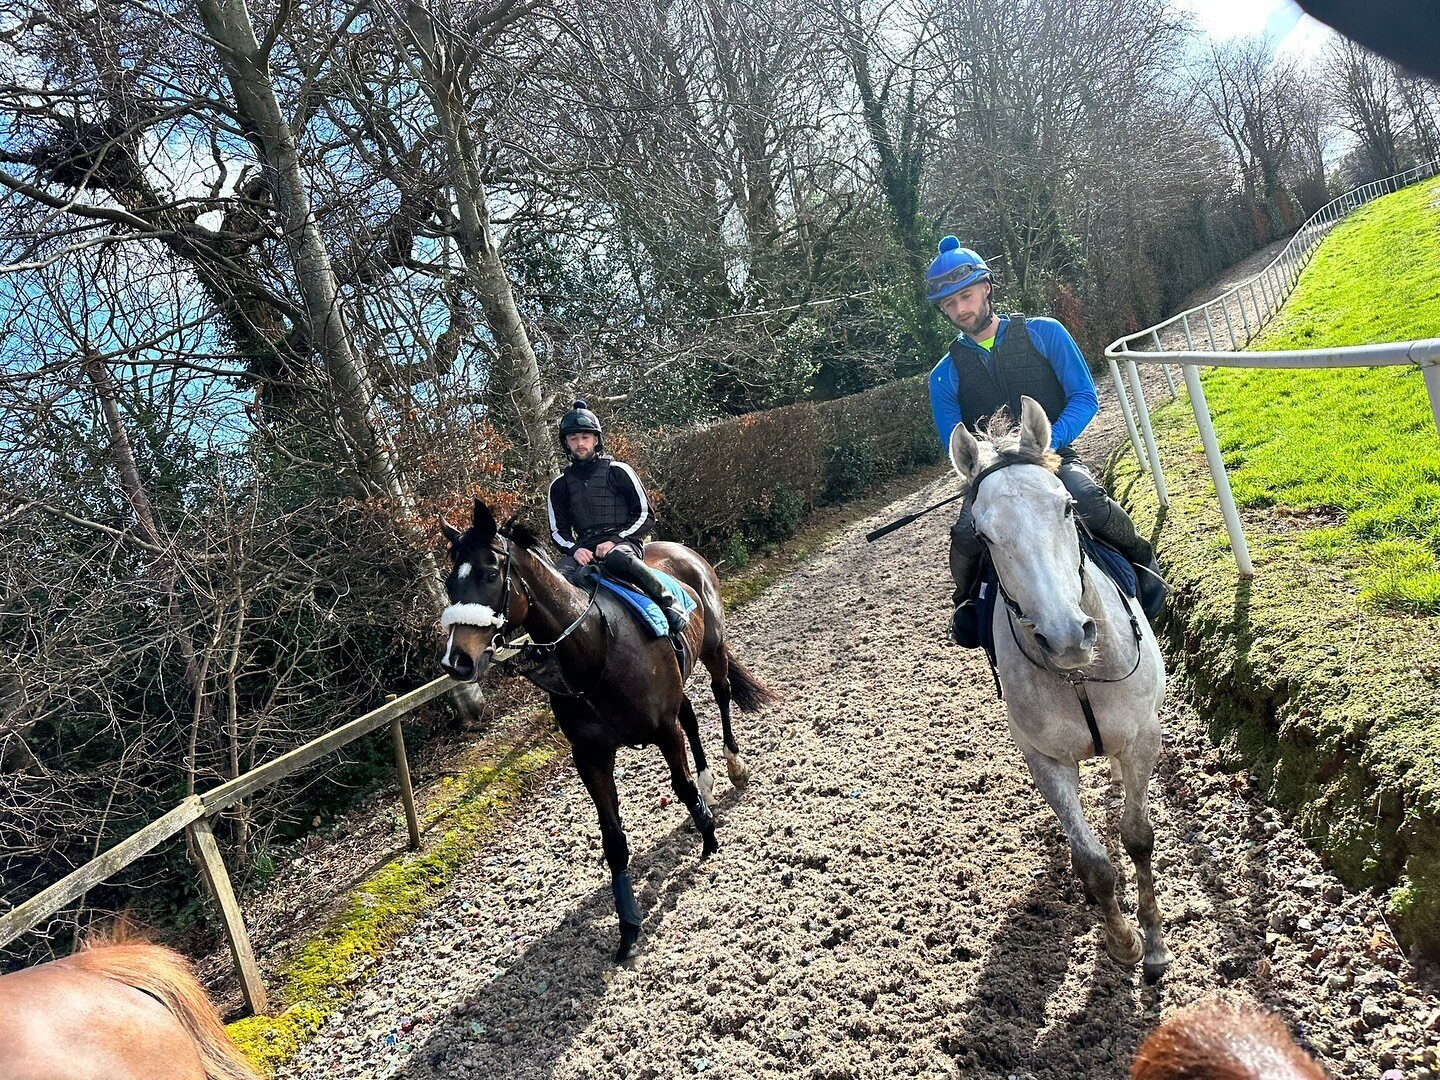 ESTATE ITALIANA AND DEMILION🐎🐎
Some of the team were lucky enough to take 4 of our horses for an away gallop today to freshen them up with a new change of scenery. 

#awayday #teamdunn #racehorses #thoroughbreds #getinvolved #chester #westbuckland 